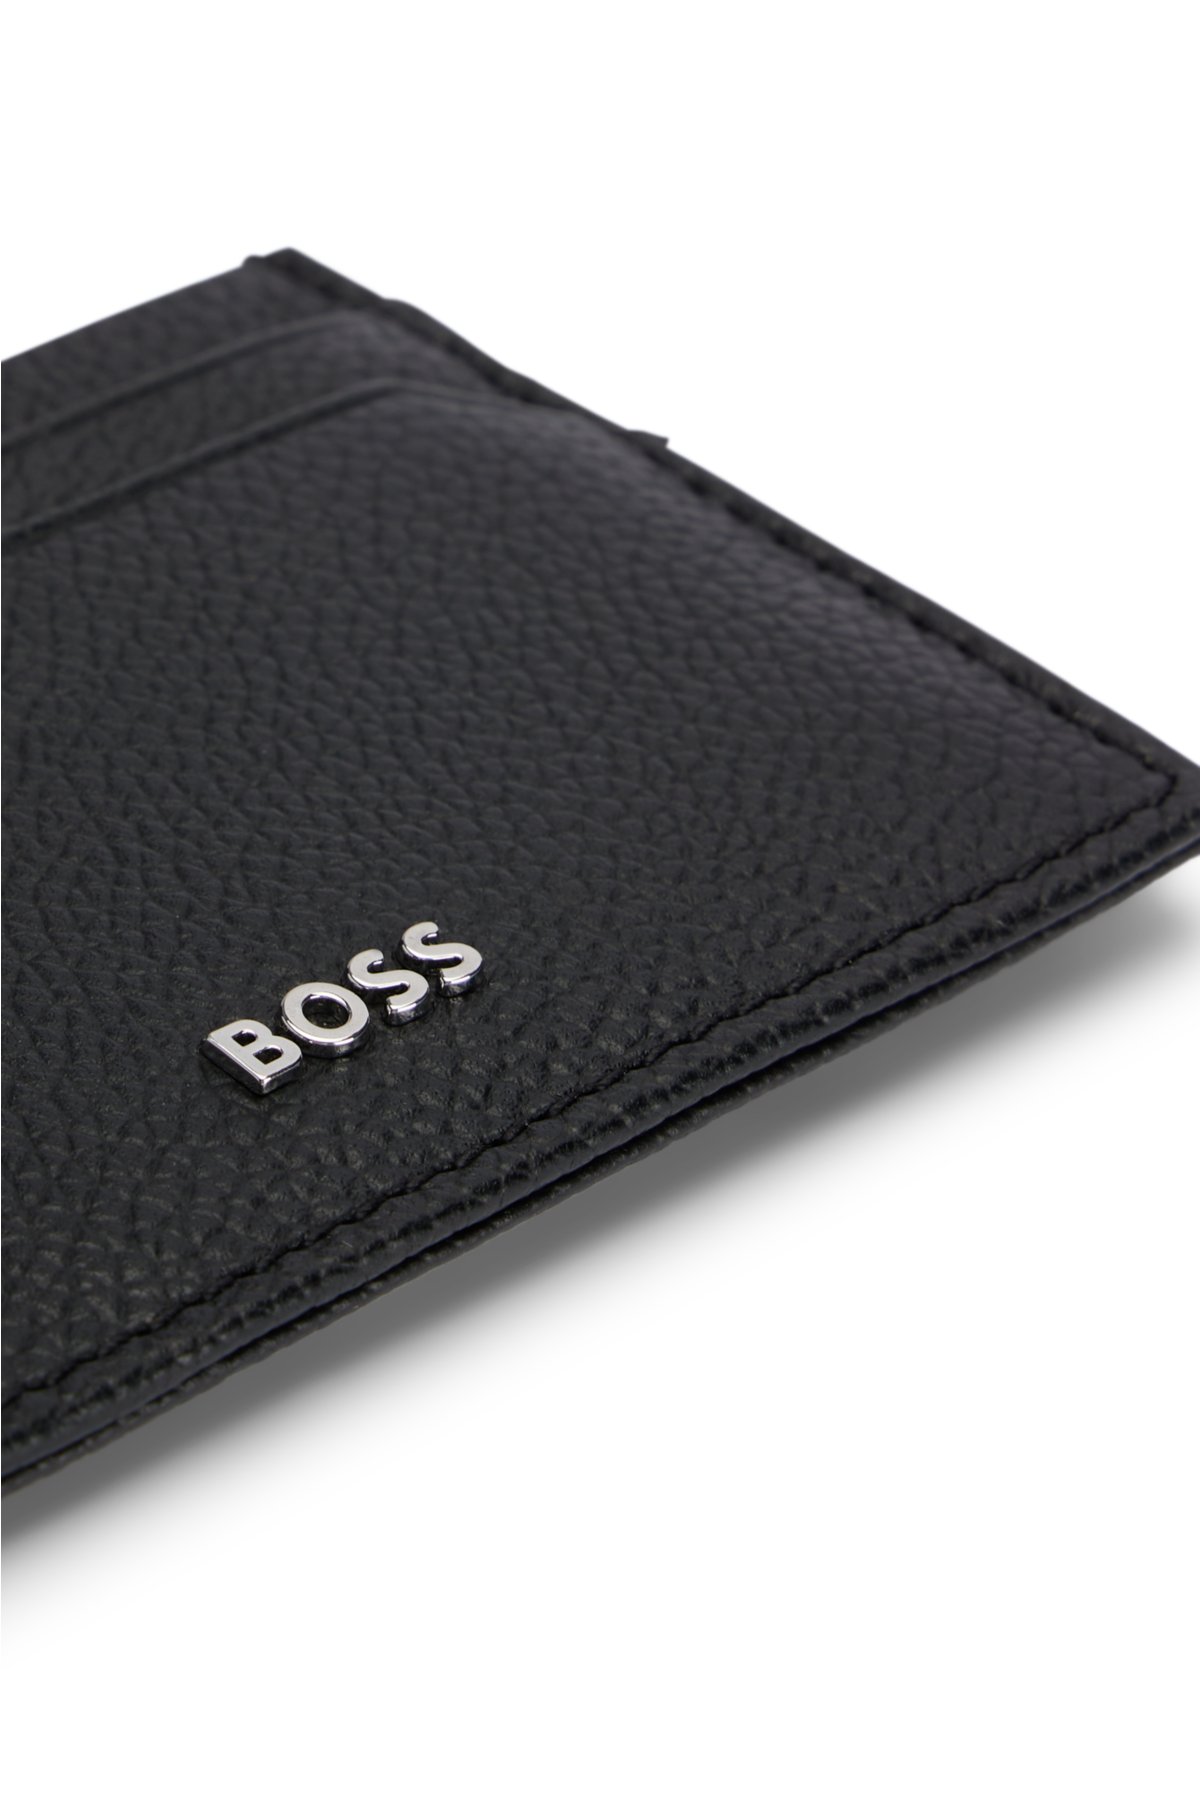 BOSS - Grained-leather card holder with embossed monograms